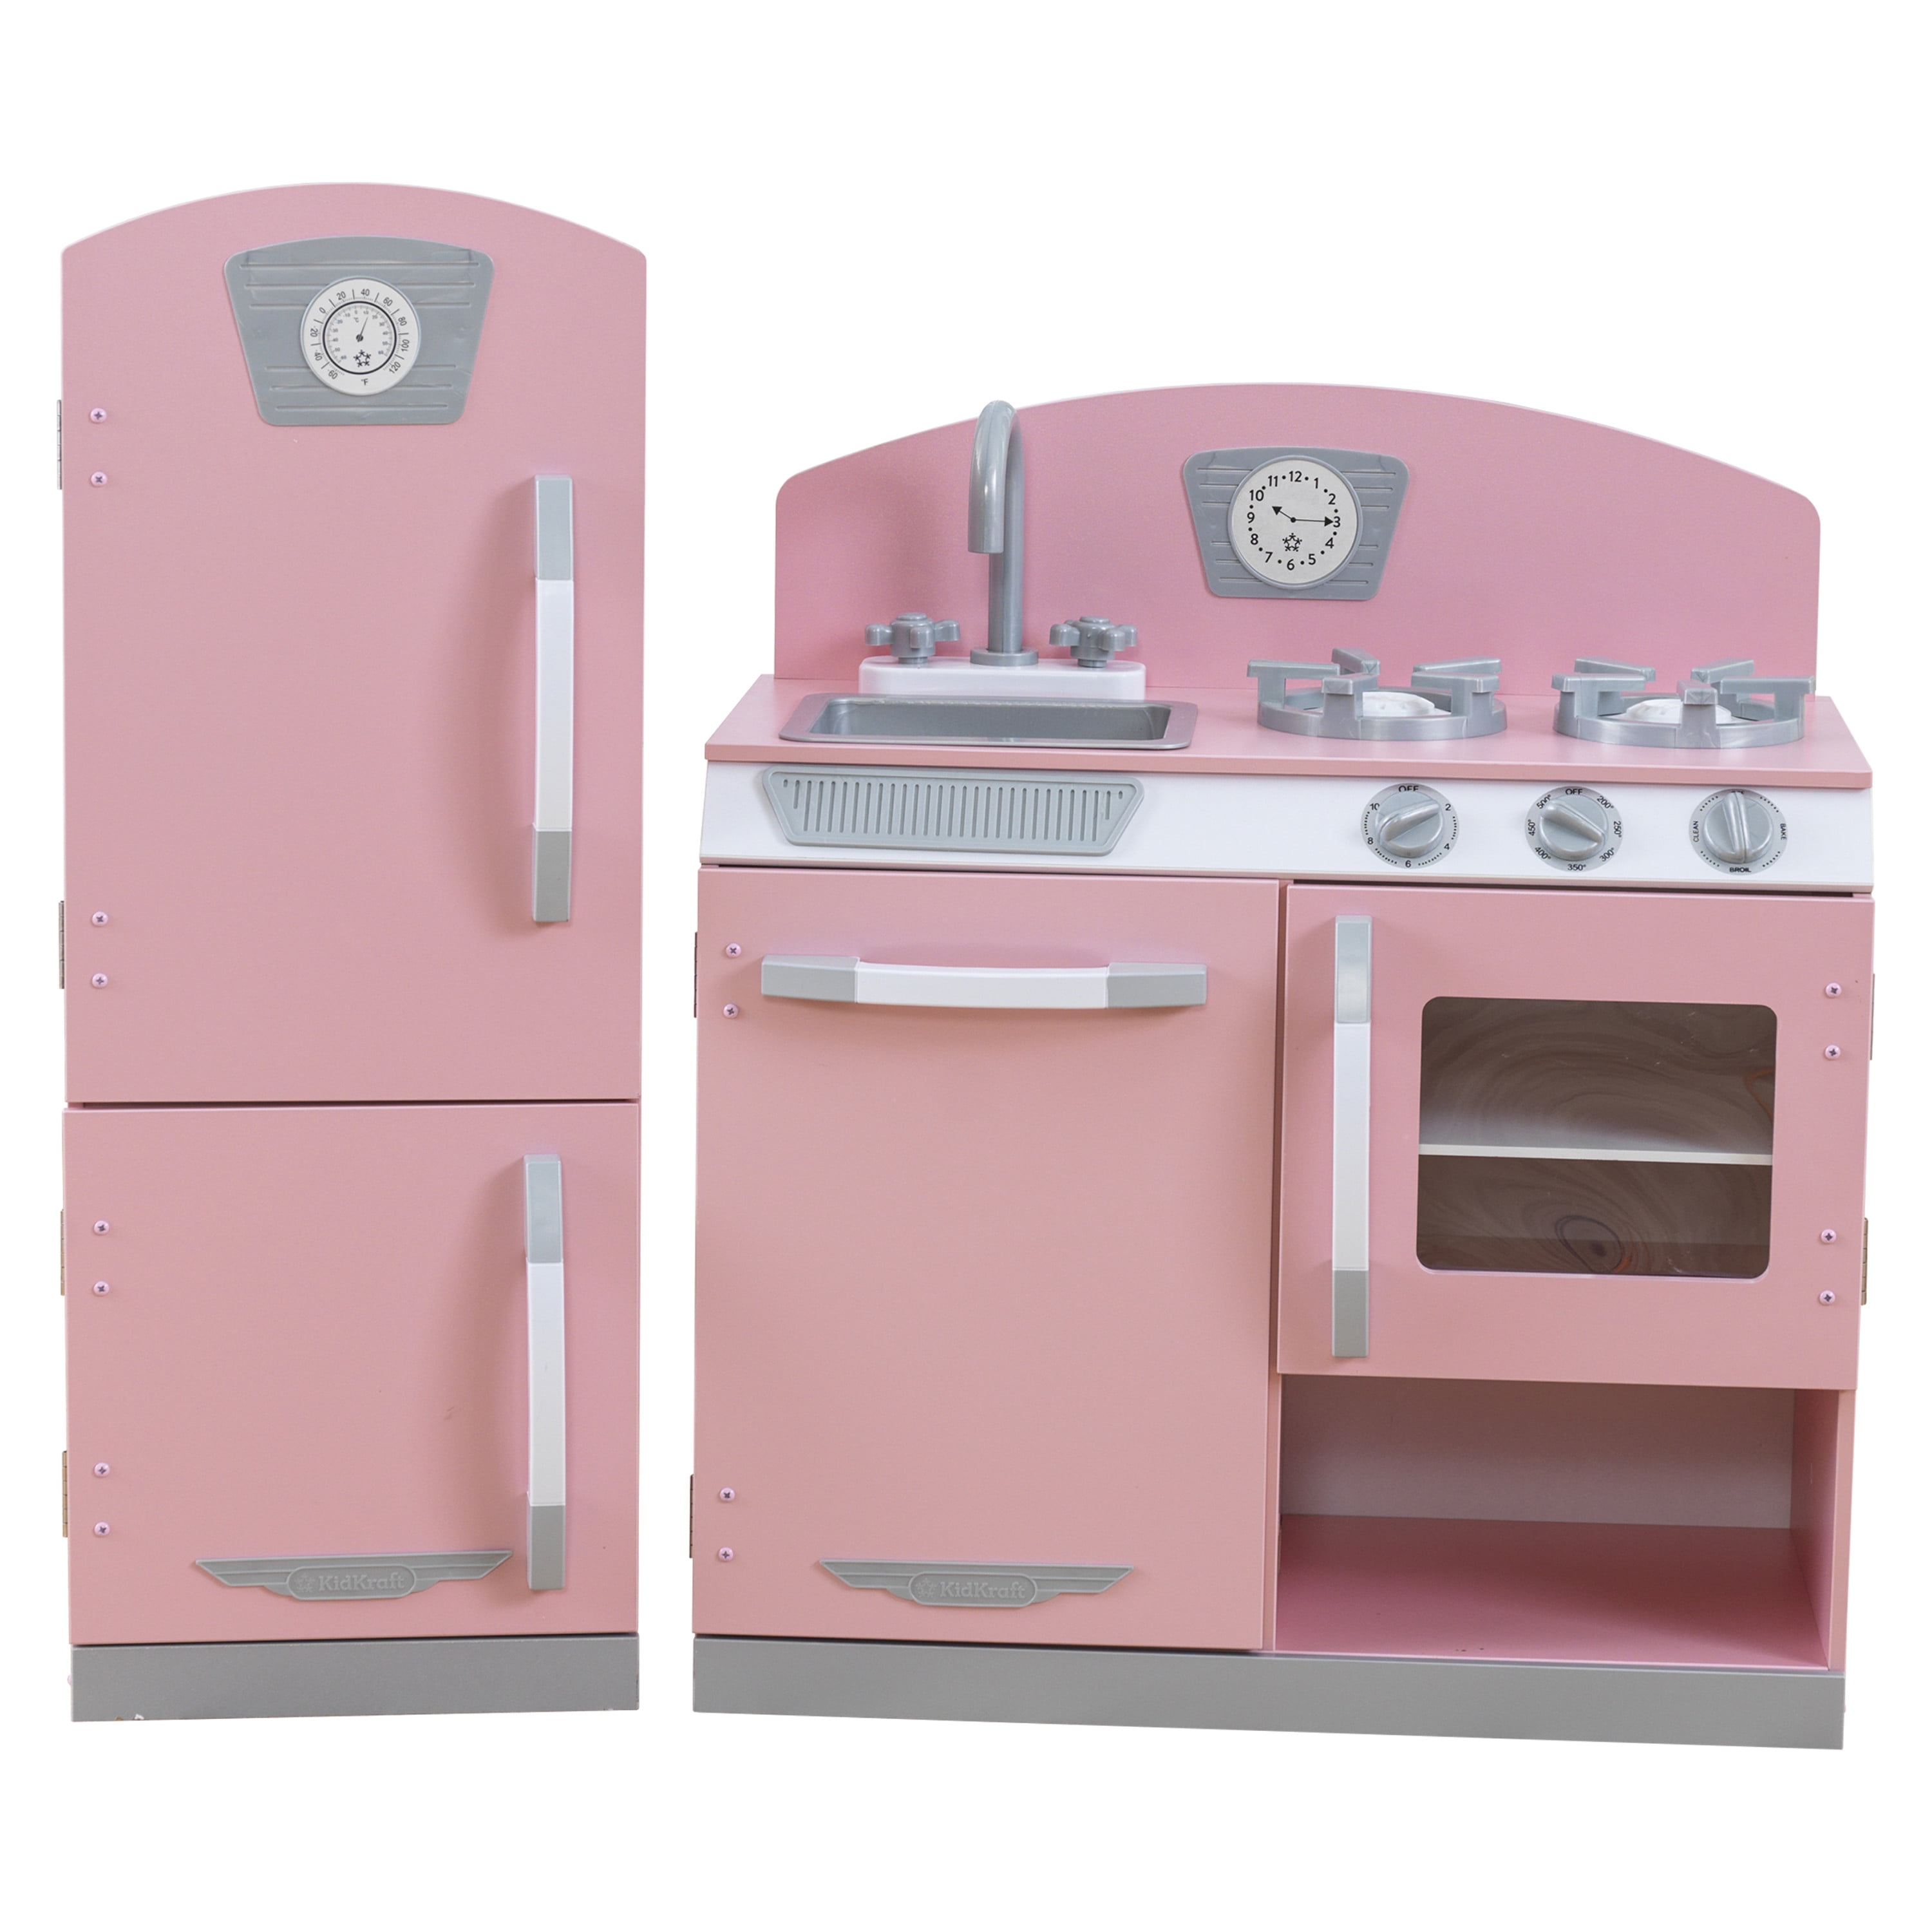 1 Pcs Pink Oven and Dishwasher Freezer Teamson Kids Retro Play Kitchen with Refrigerator 